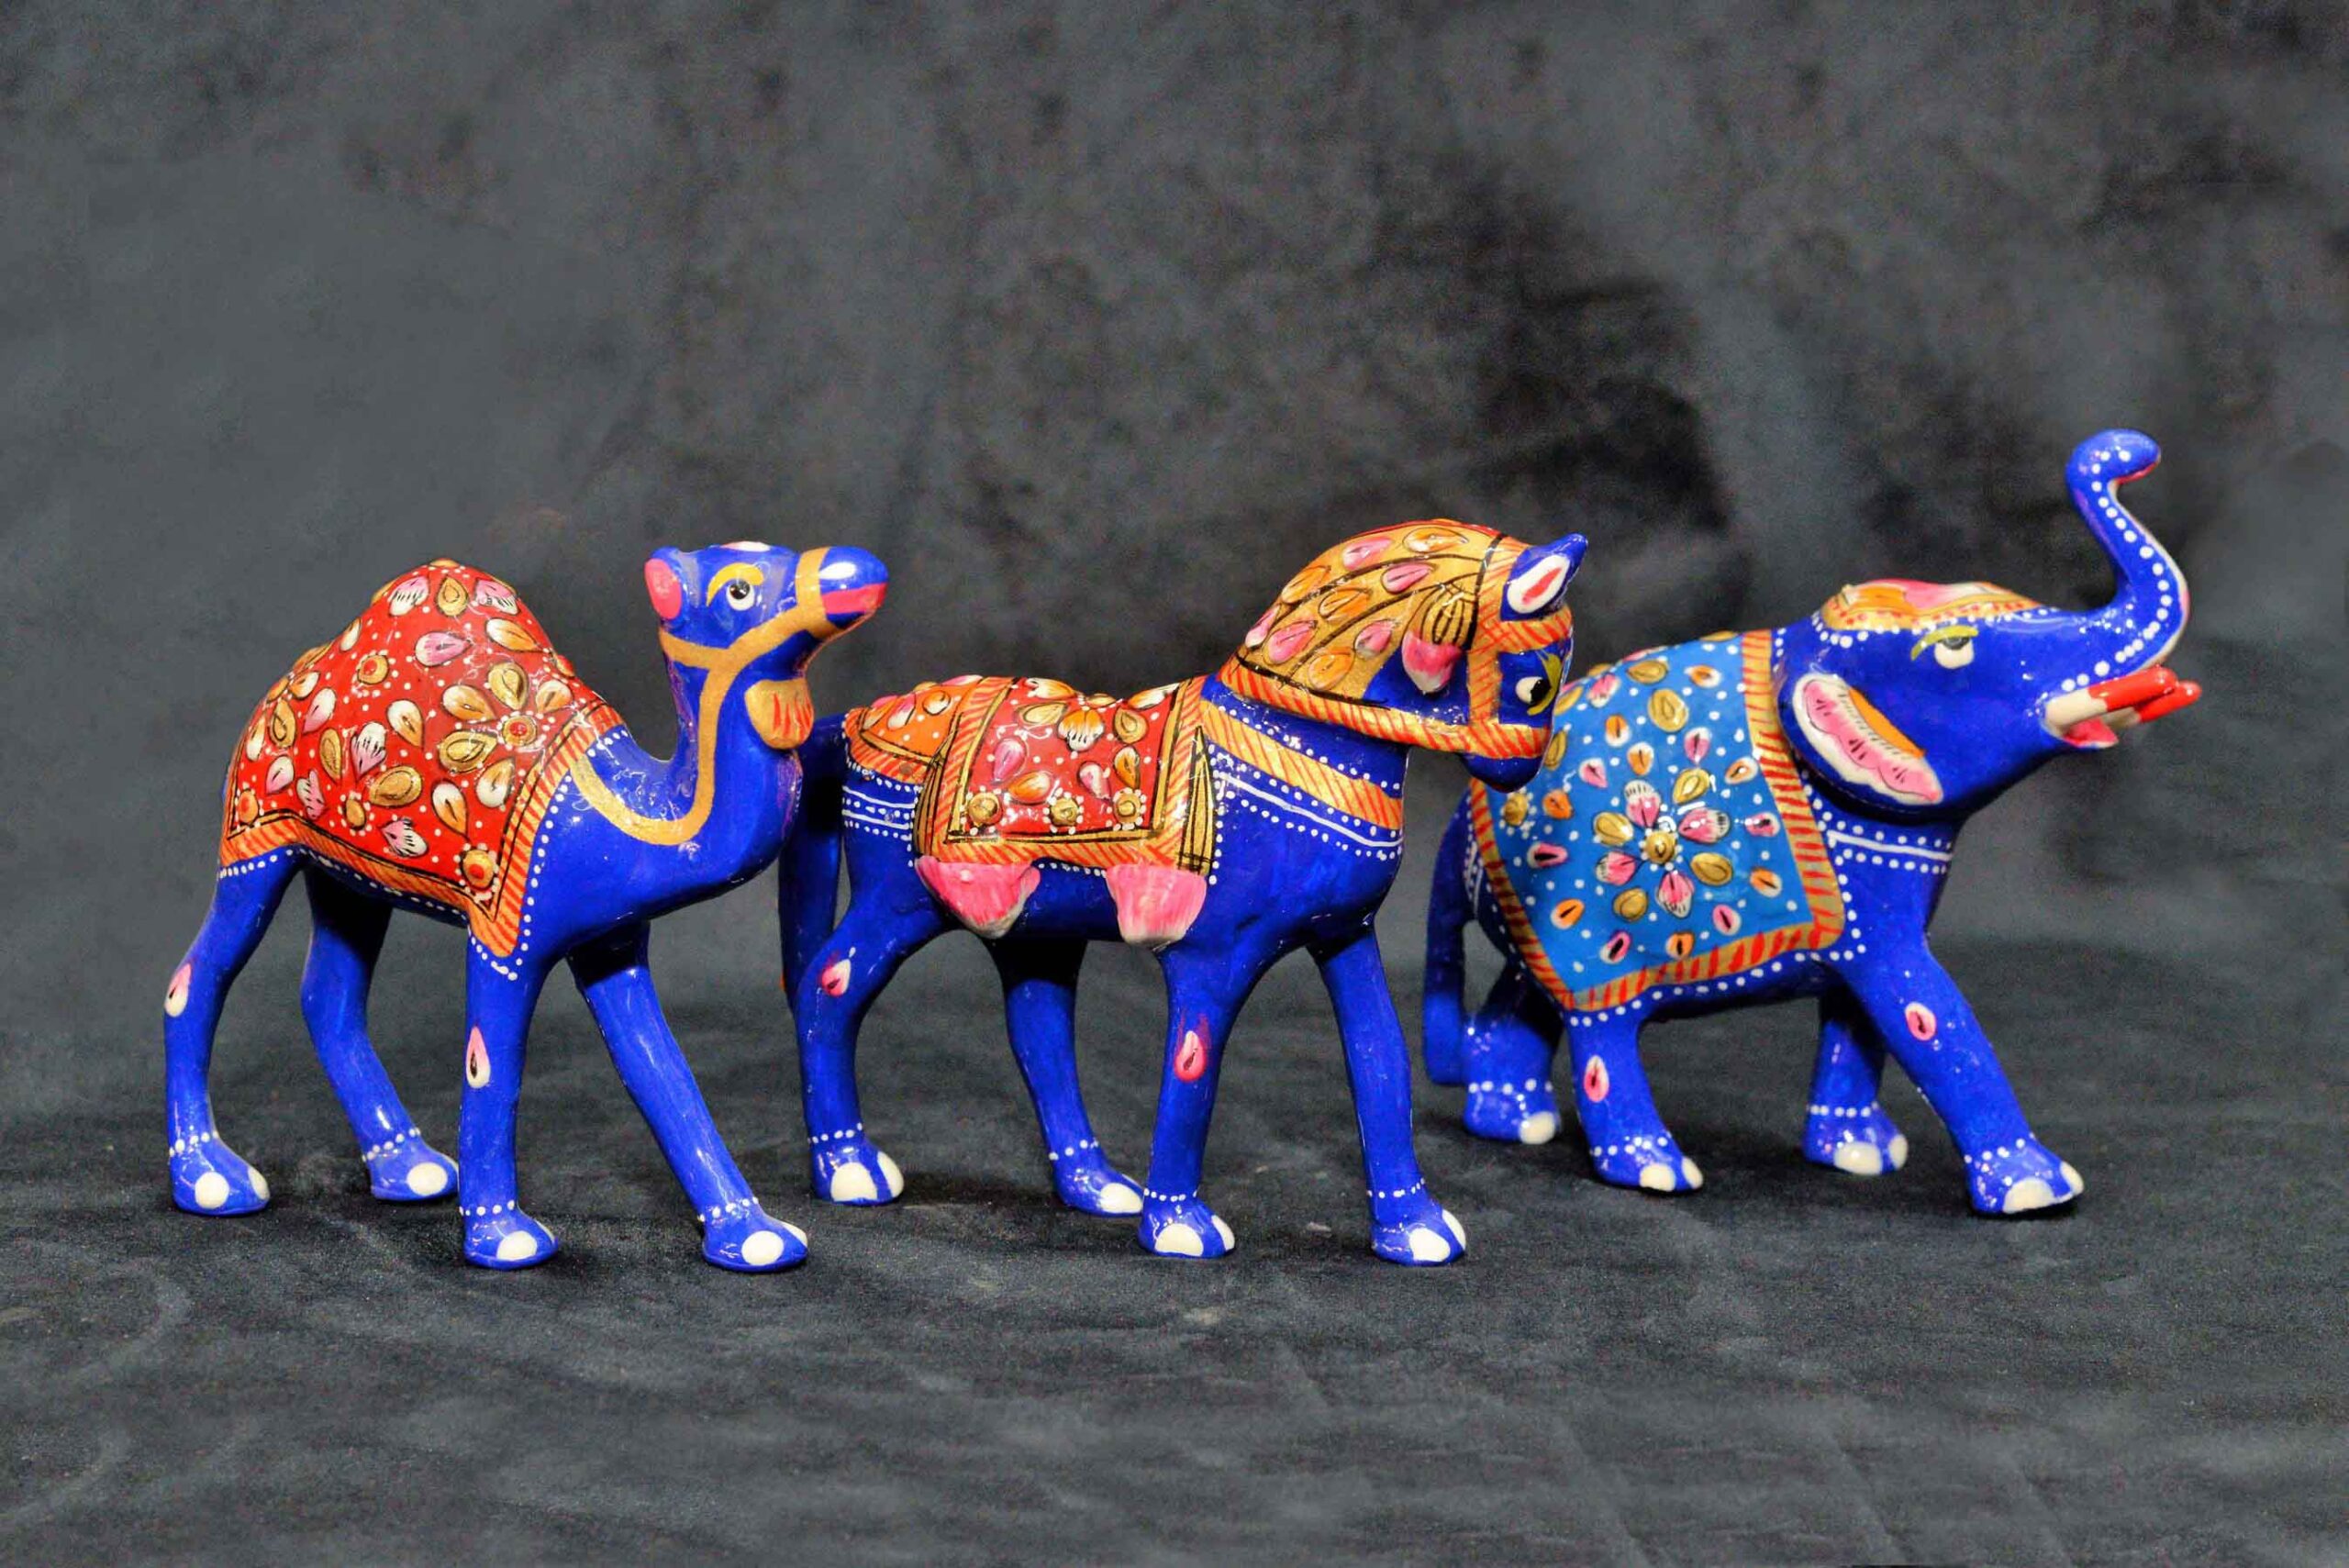 Rajasthani Handicrafts: A Timeless Legacy of Creativity and Skill